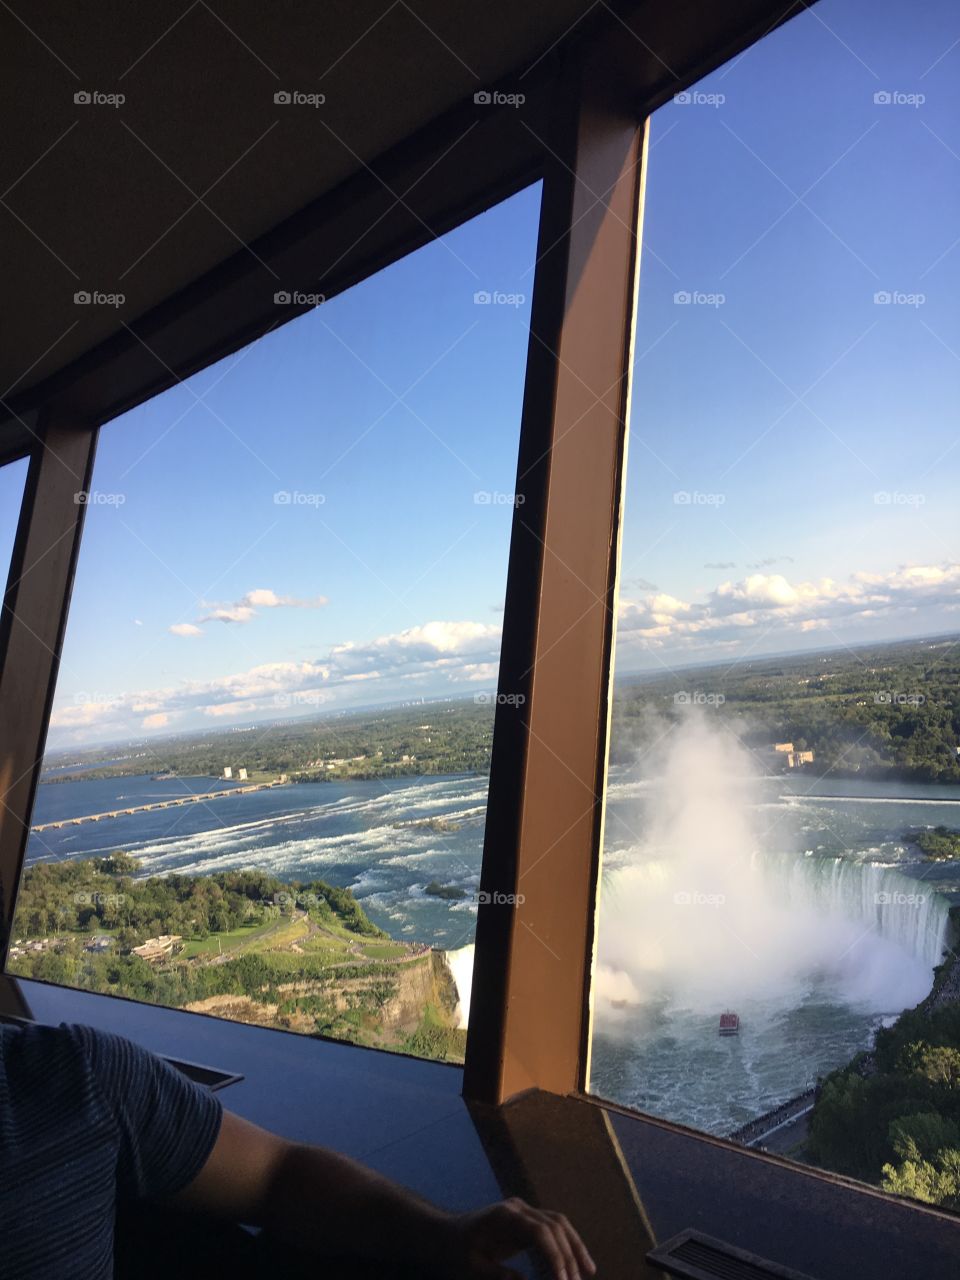 A restaurant with a view